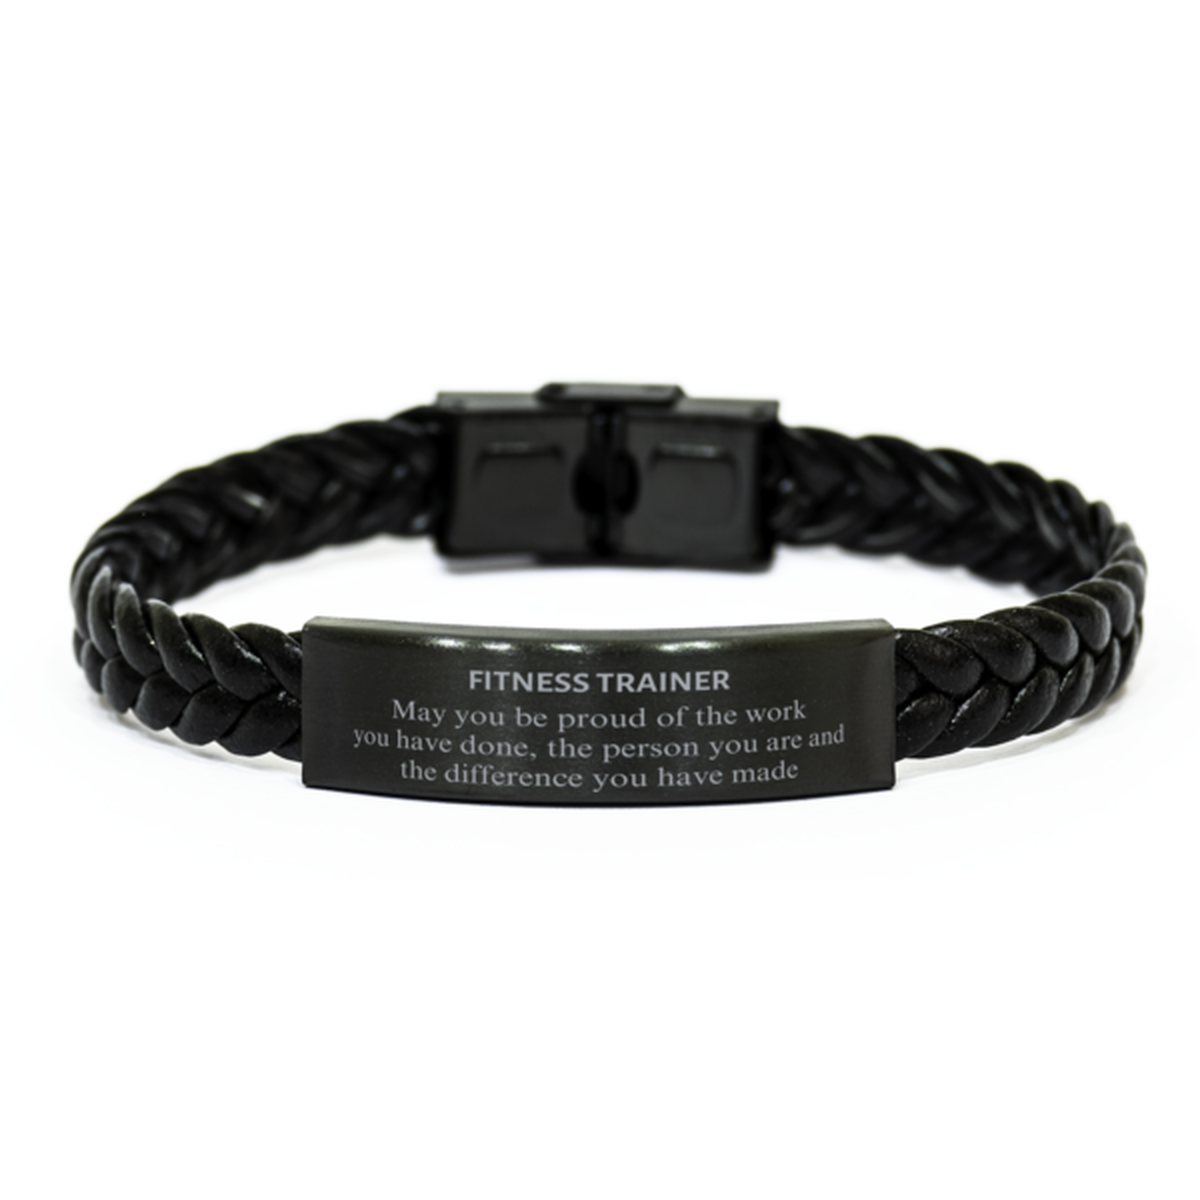 Fitness Trainer May you be proud of the work you have done, Retirement Fitness Trainer Braided Leather Bracelet for Colleague Appreciation Gifts Amazing for Fitness Trainer